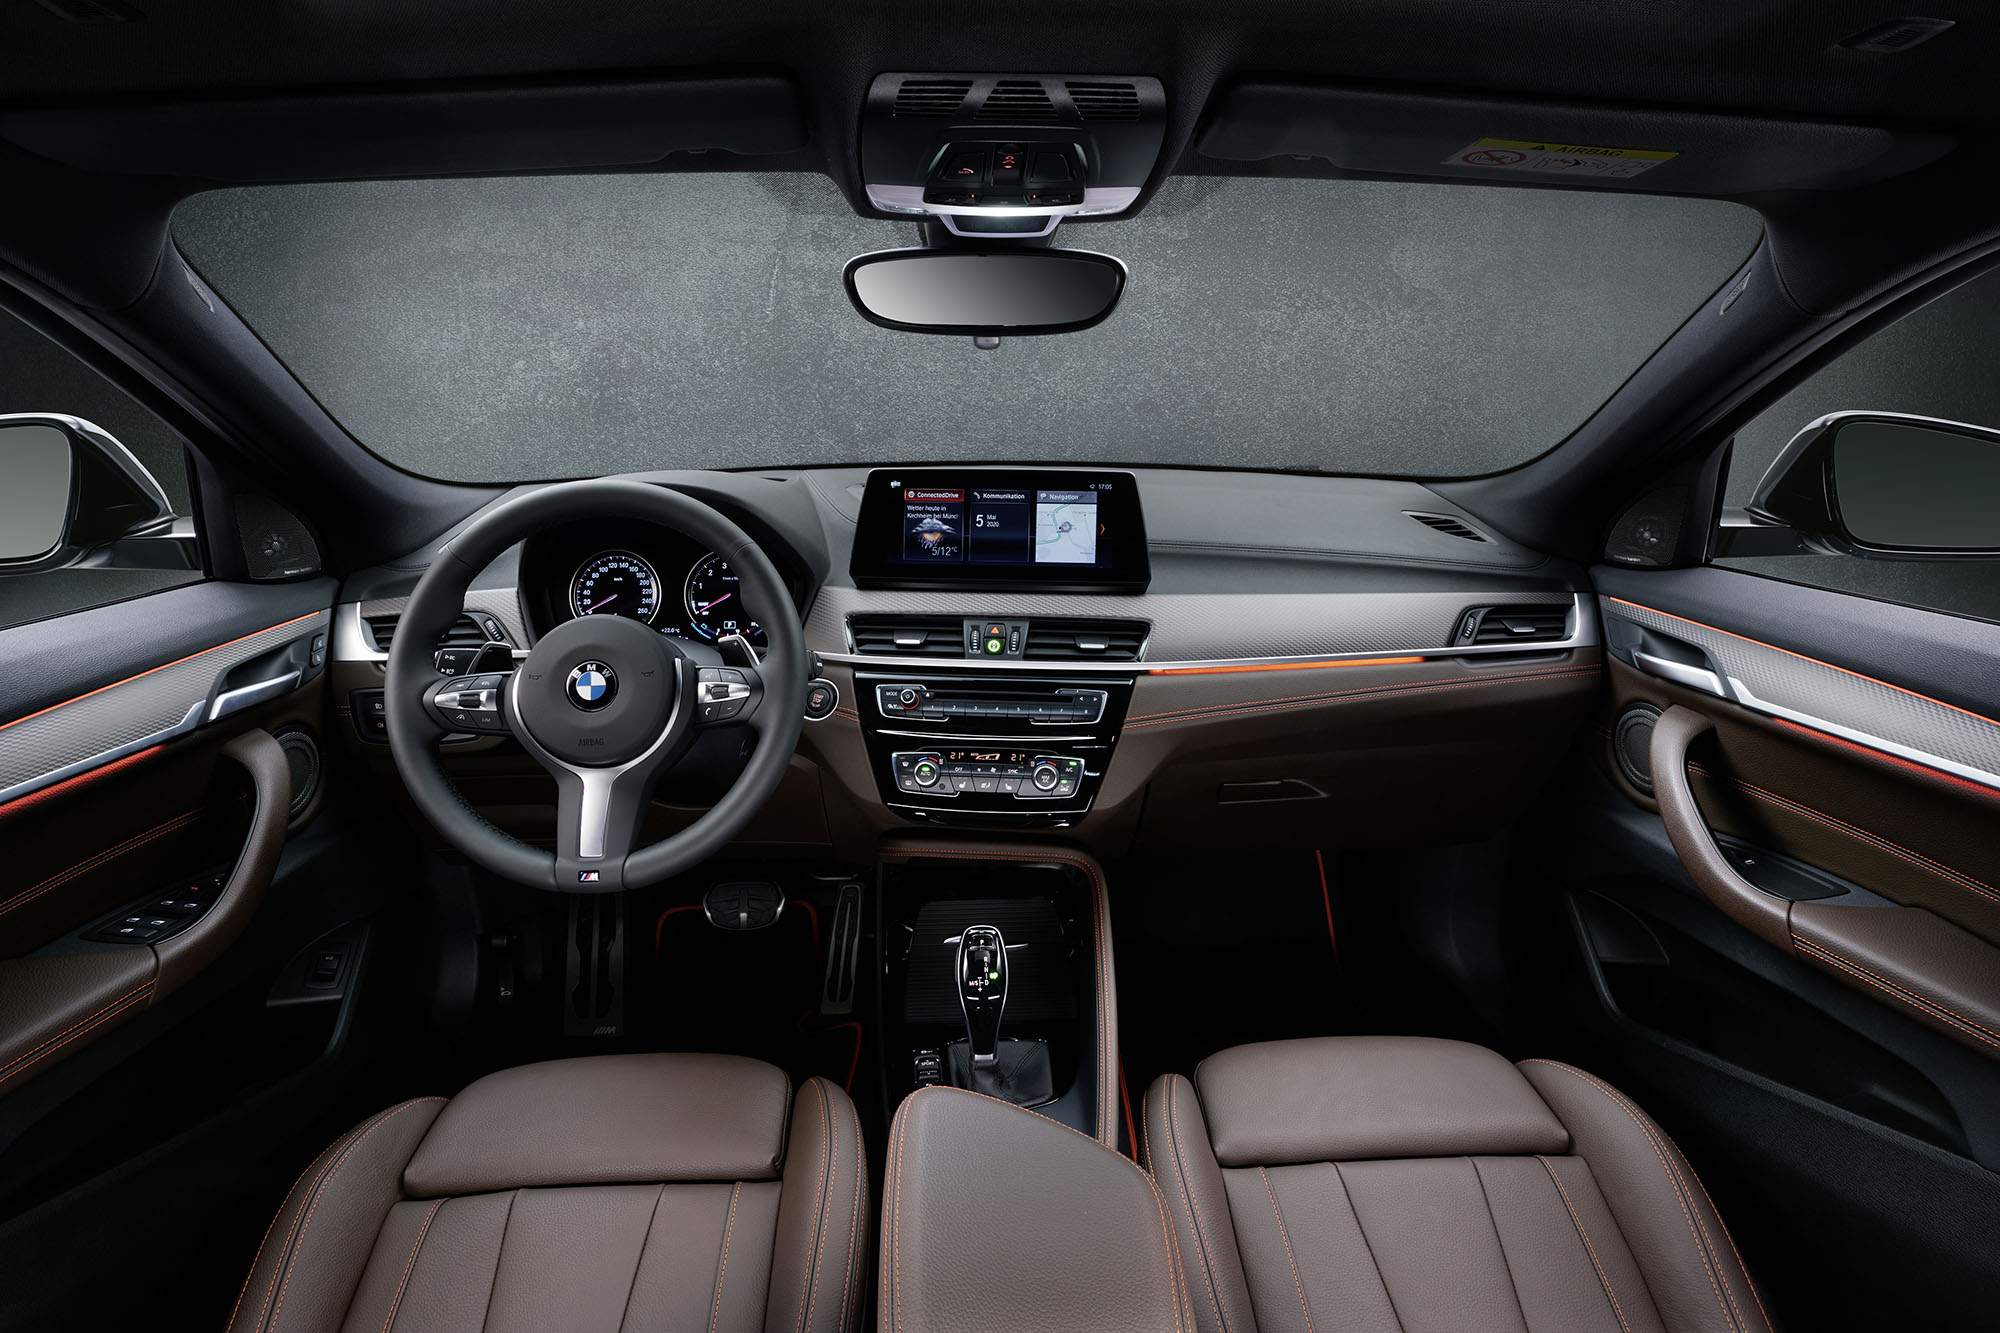  BMW X2 interior in brown